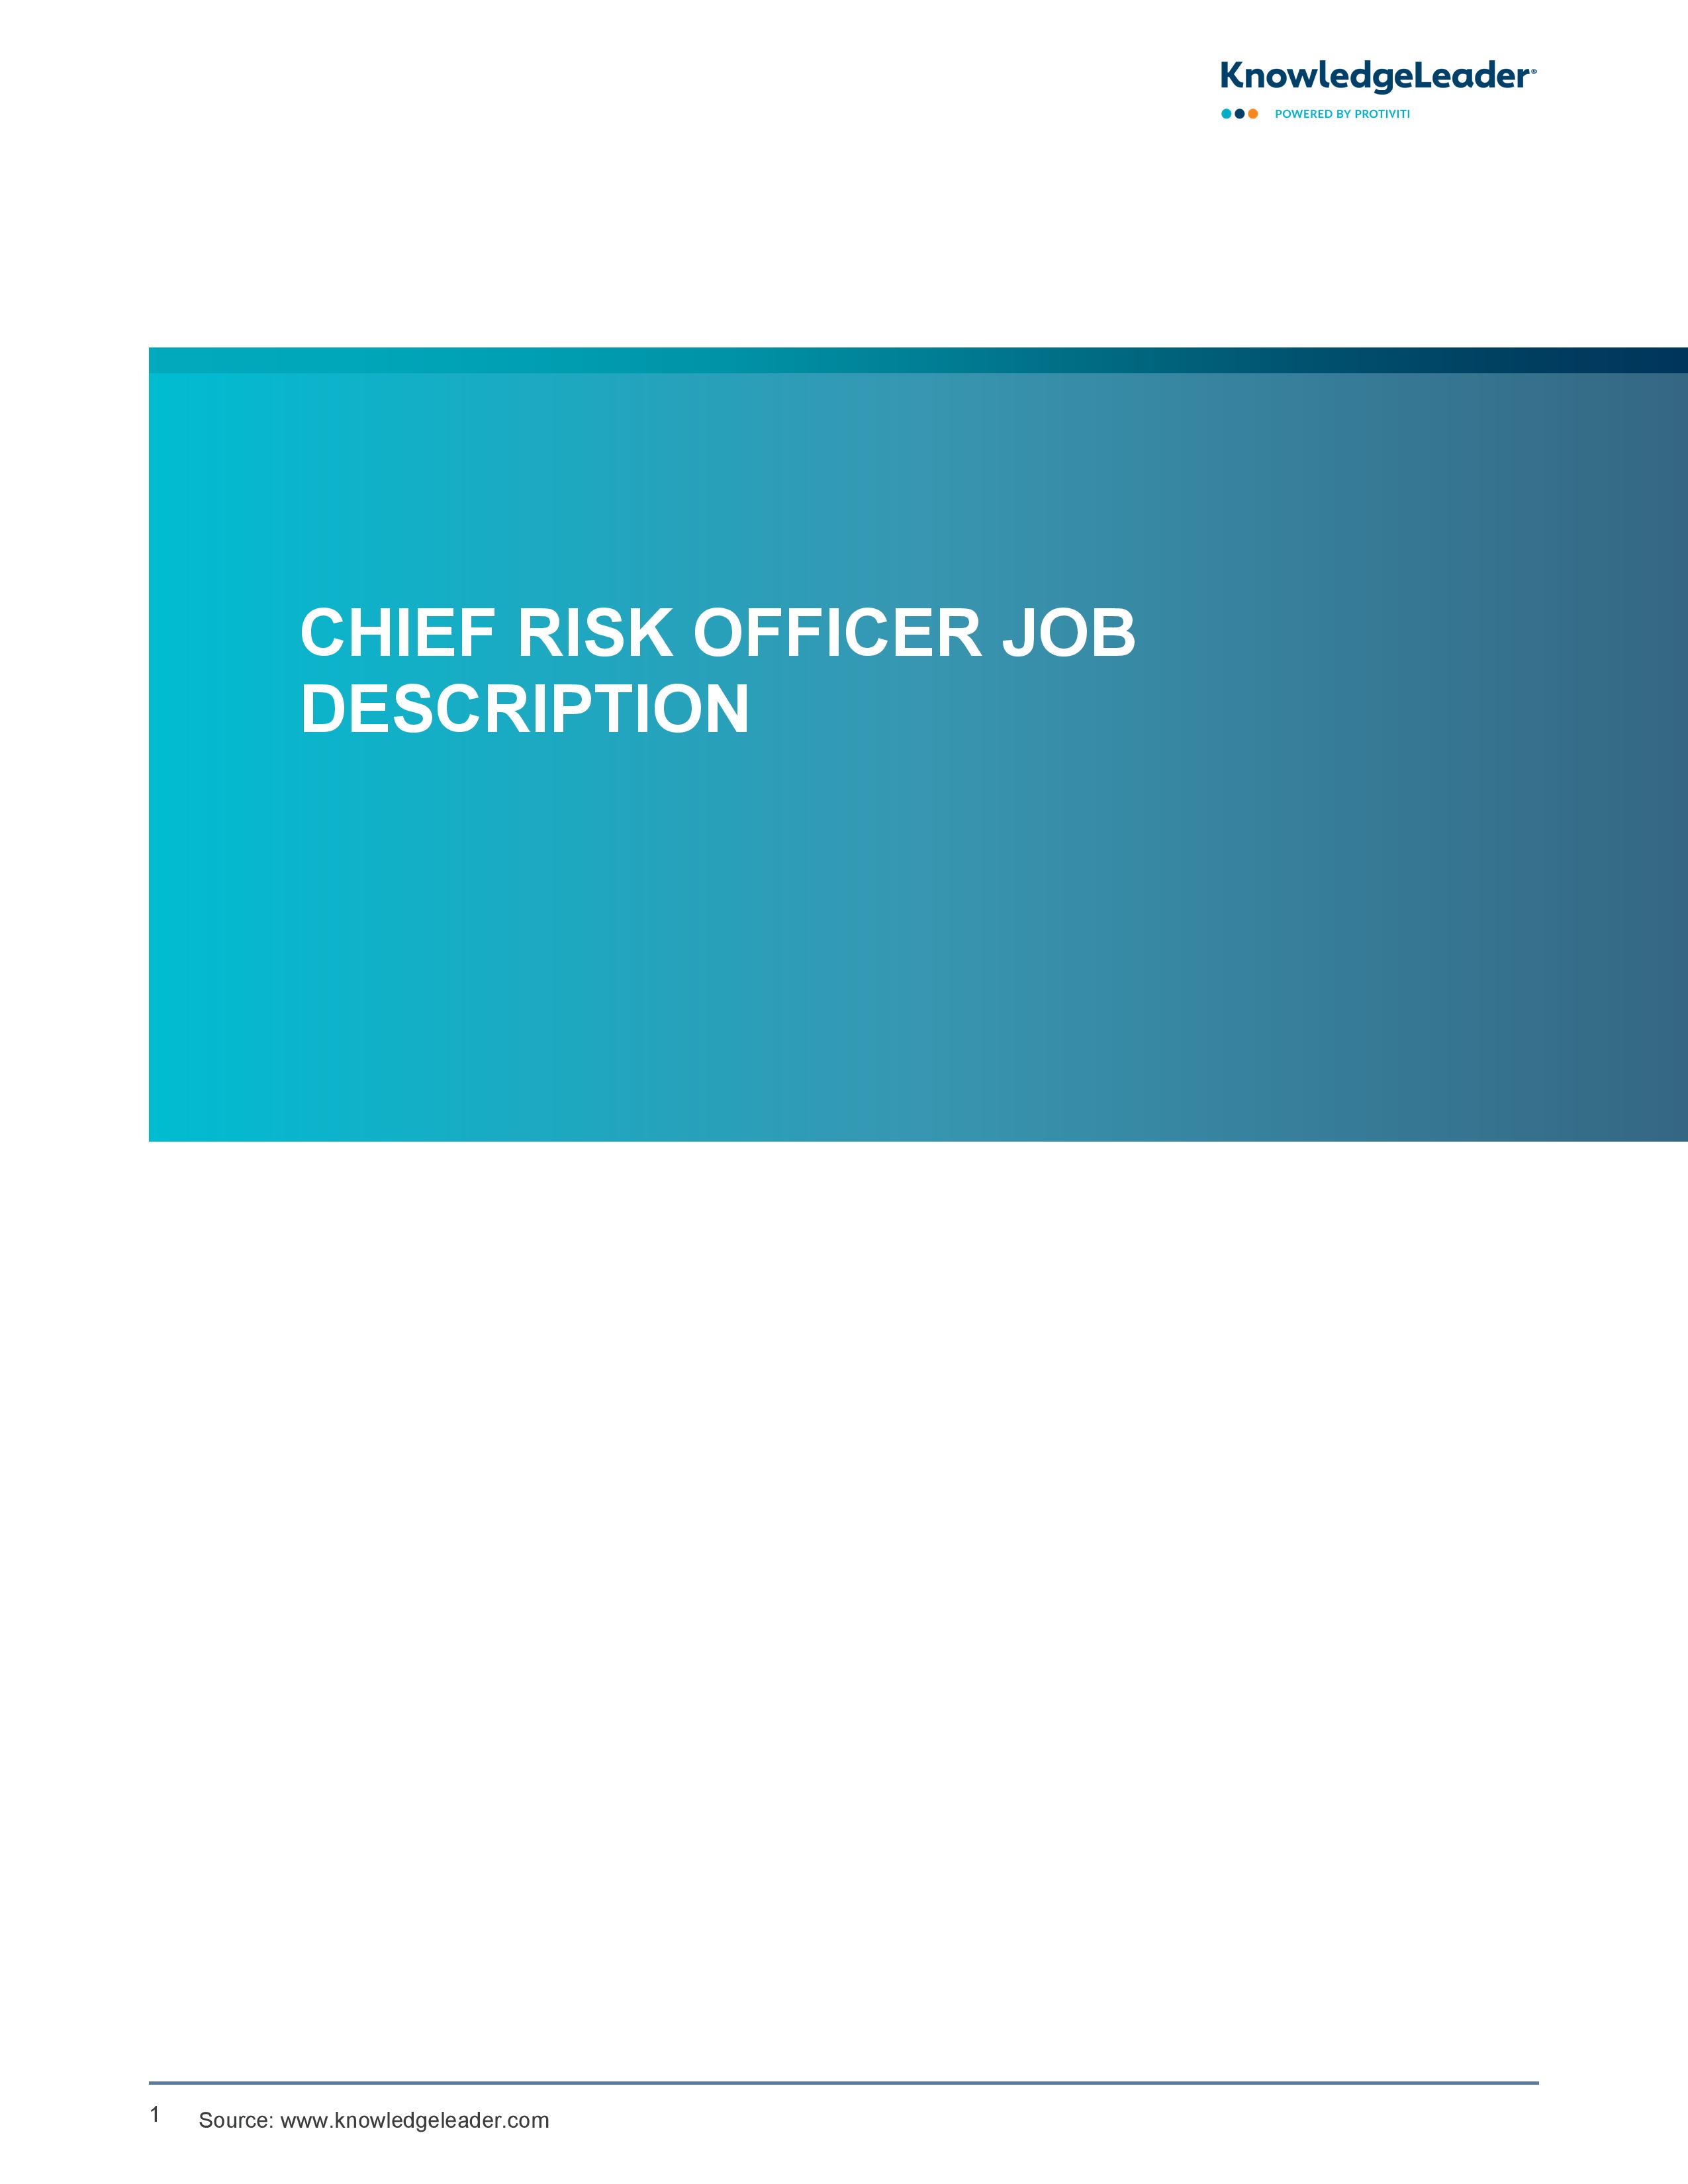 screenshot of the first page of Chief Risk Officer Job Description